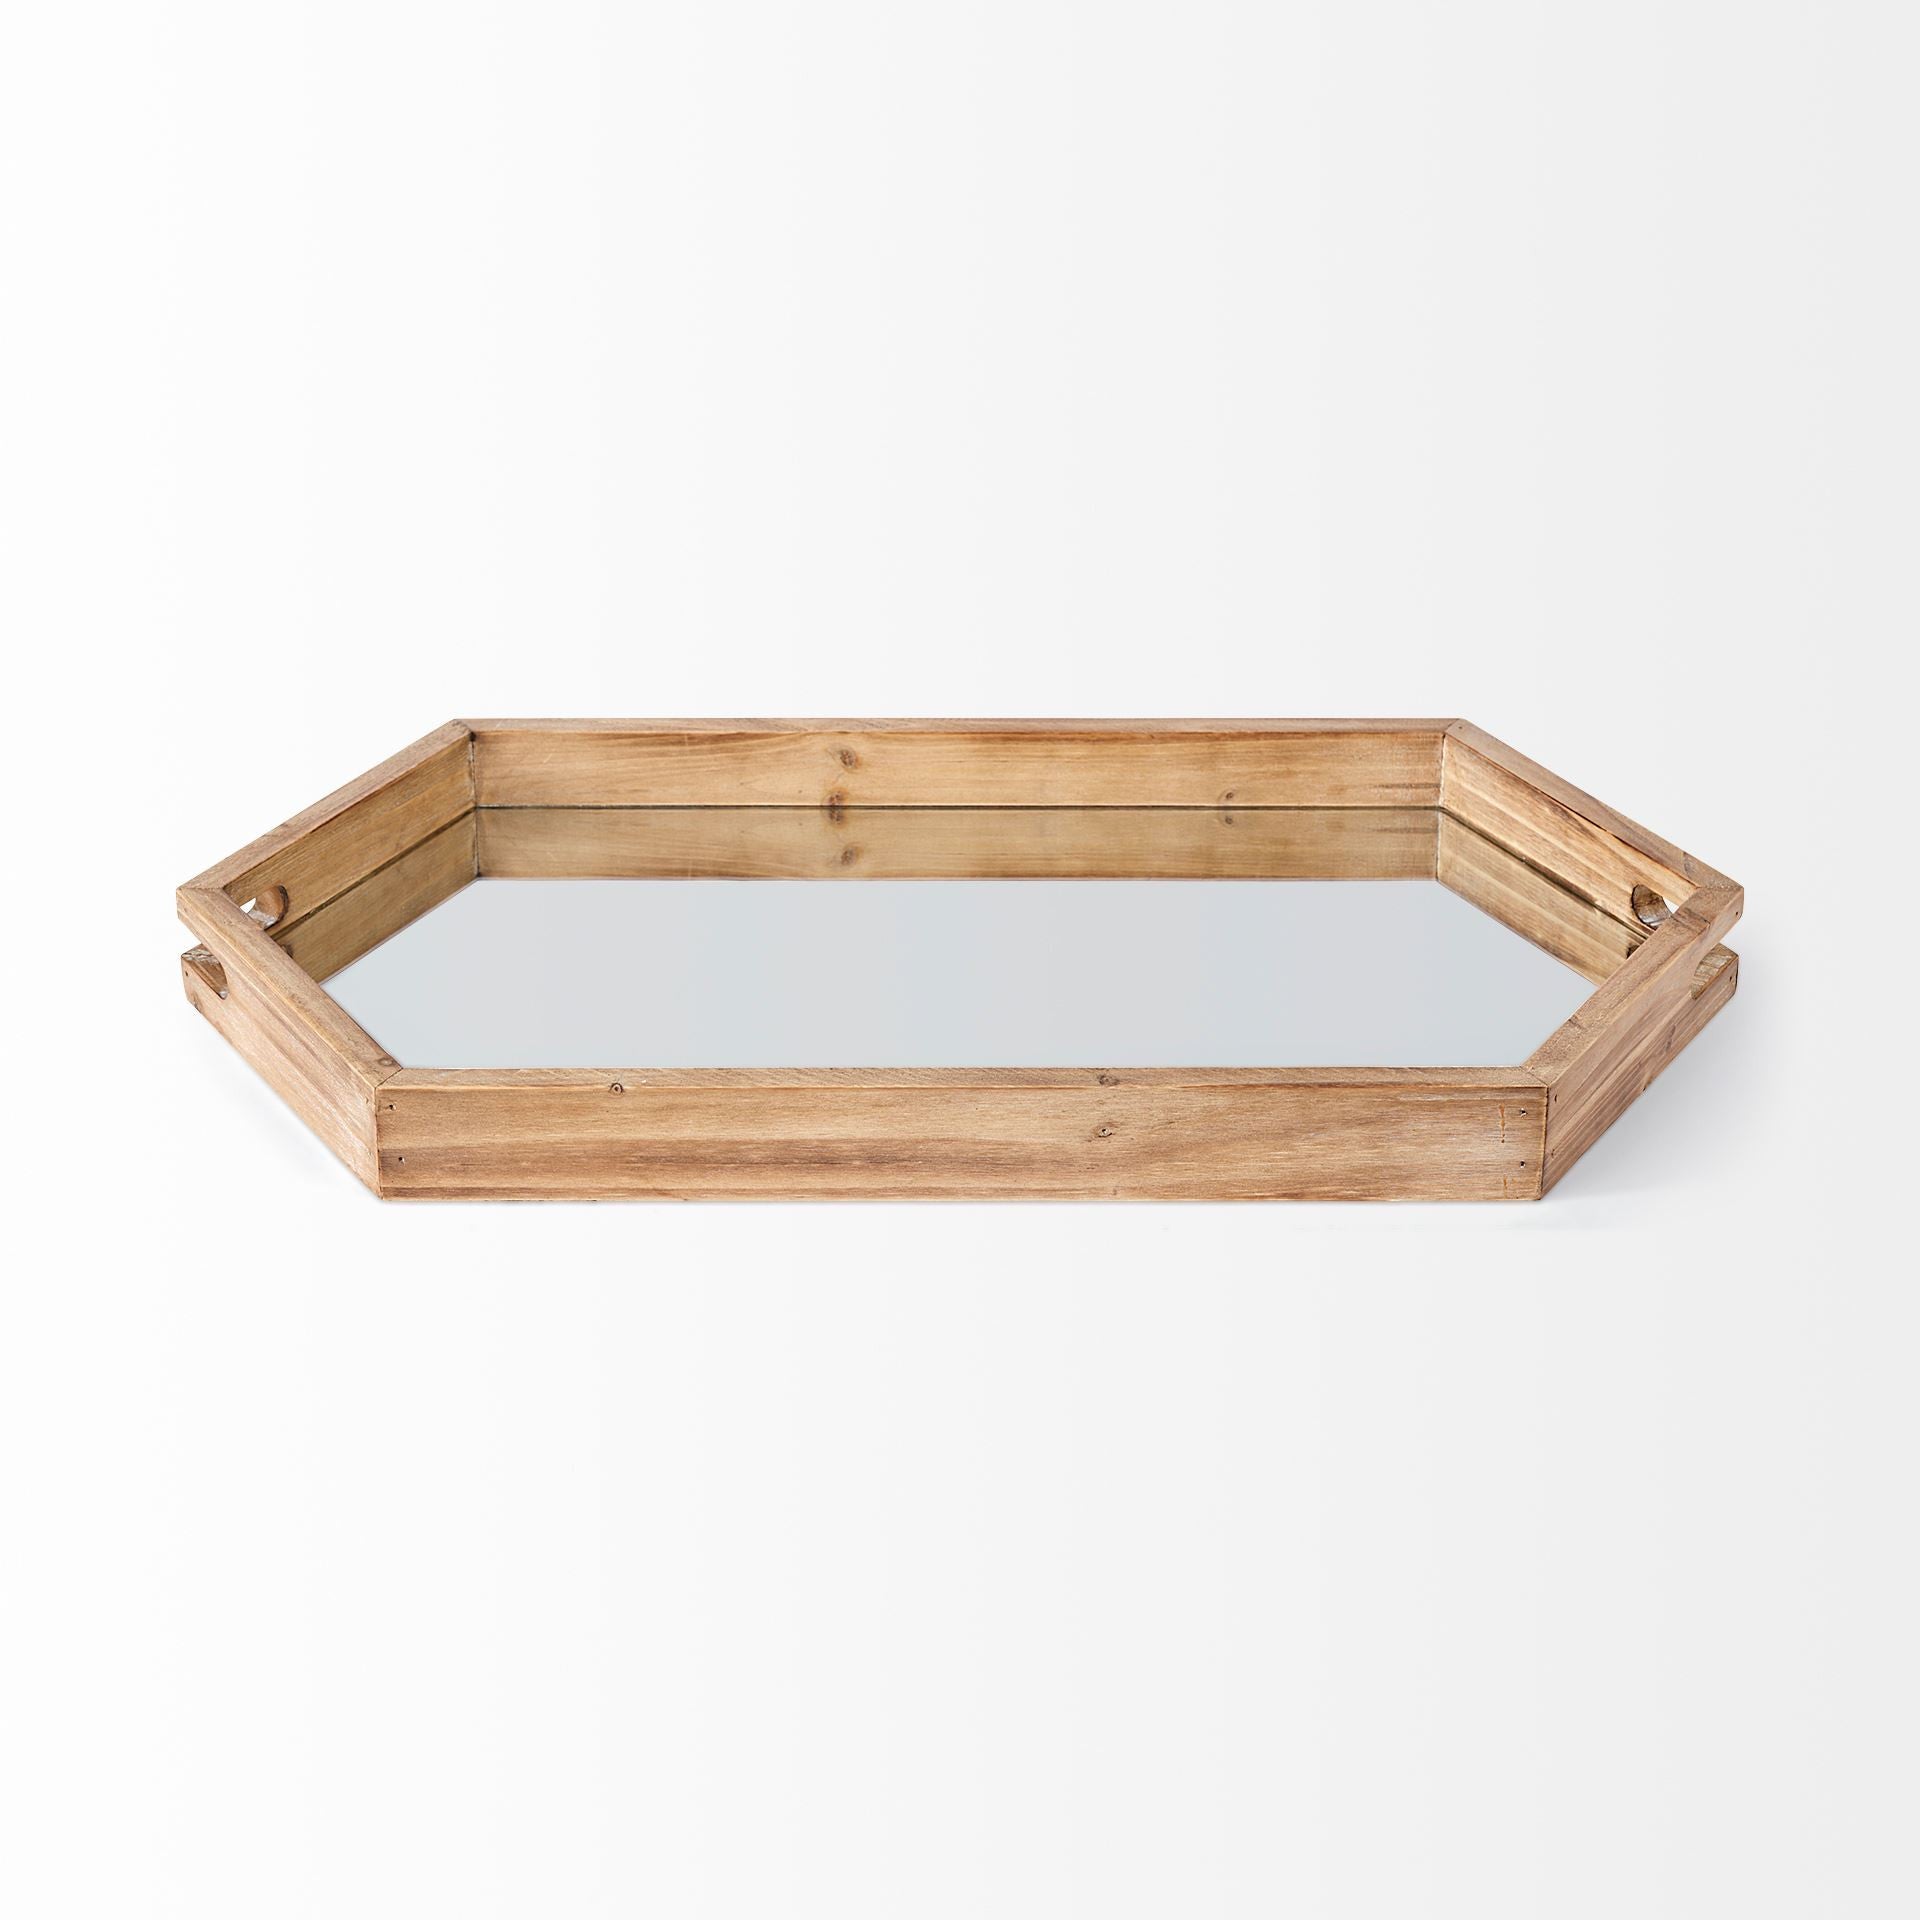 Natural Polished Wood Mirror Glass Lined Top Tray